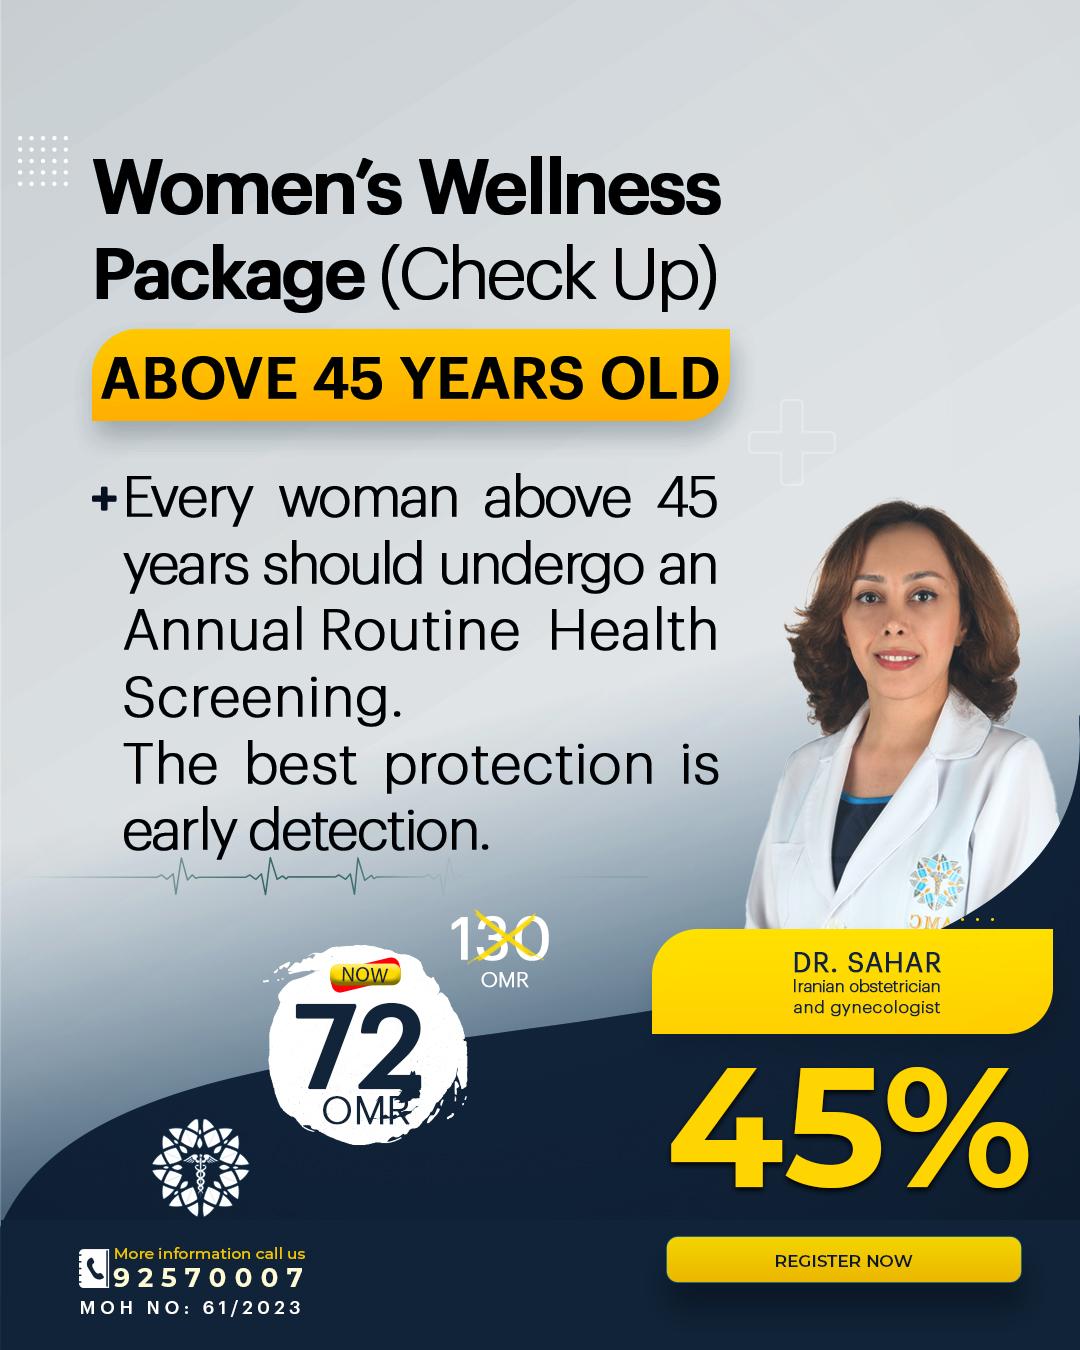 Women’s Wellness Package (Check Up)